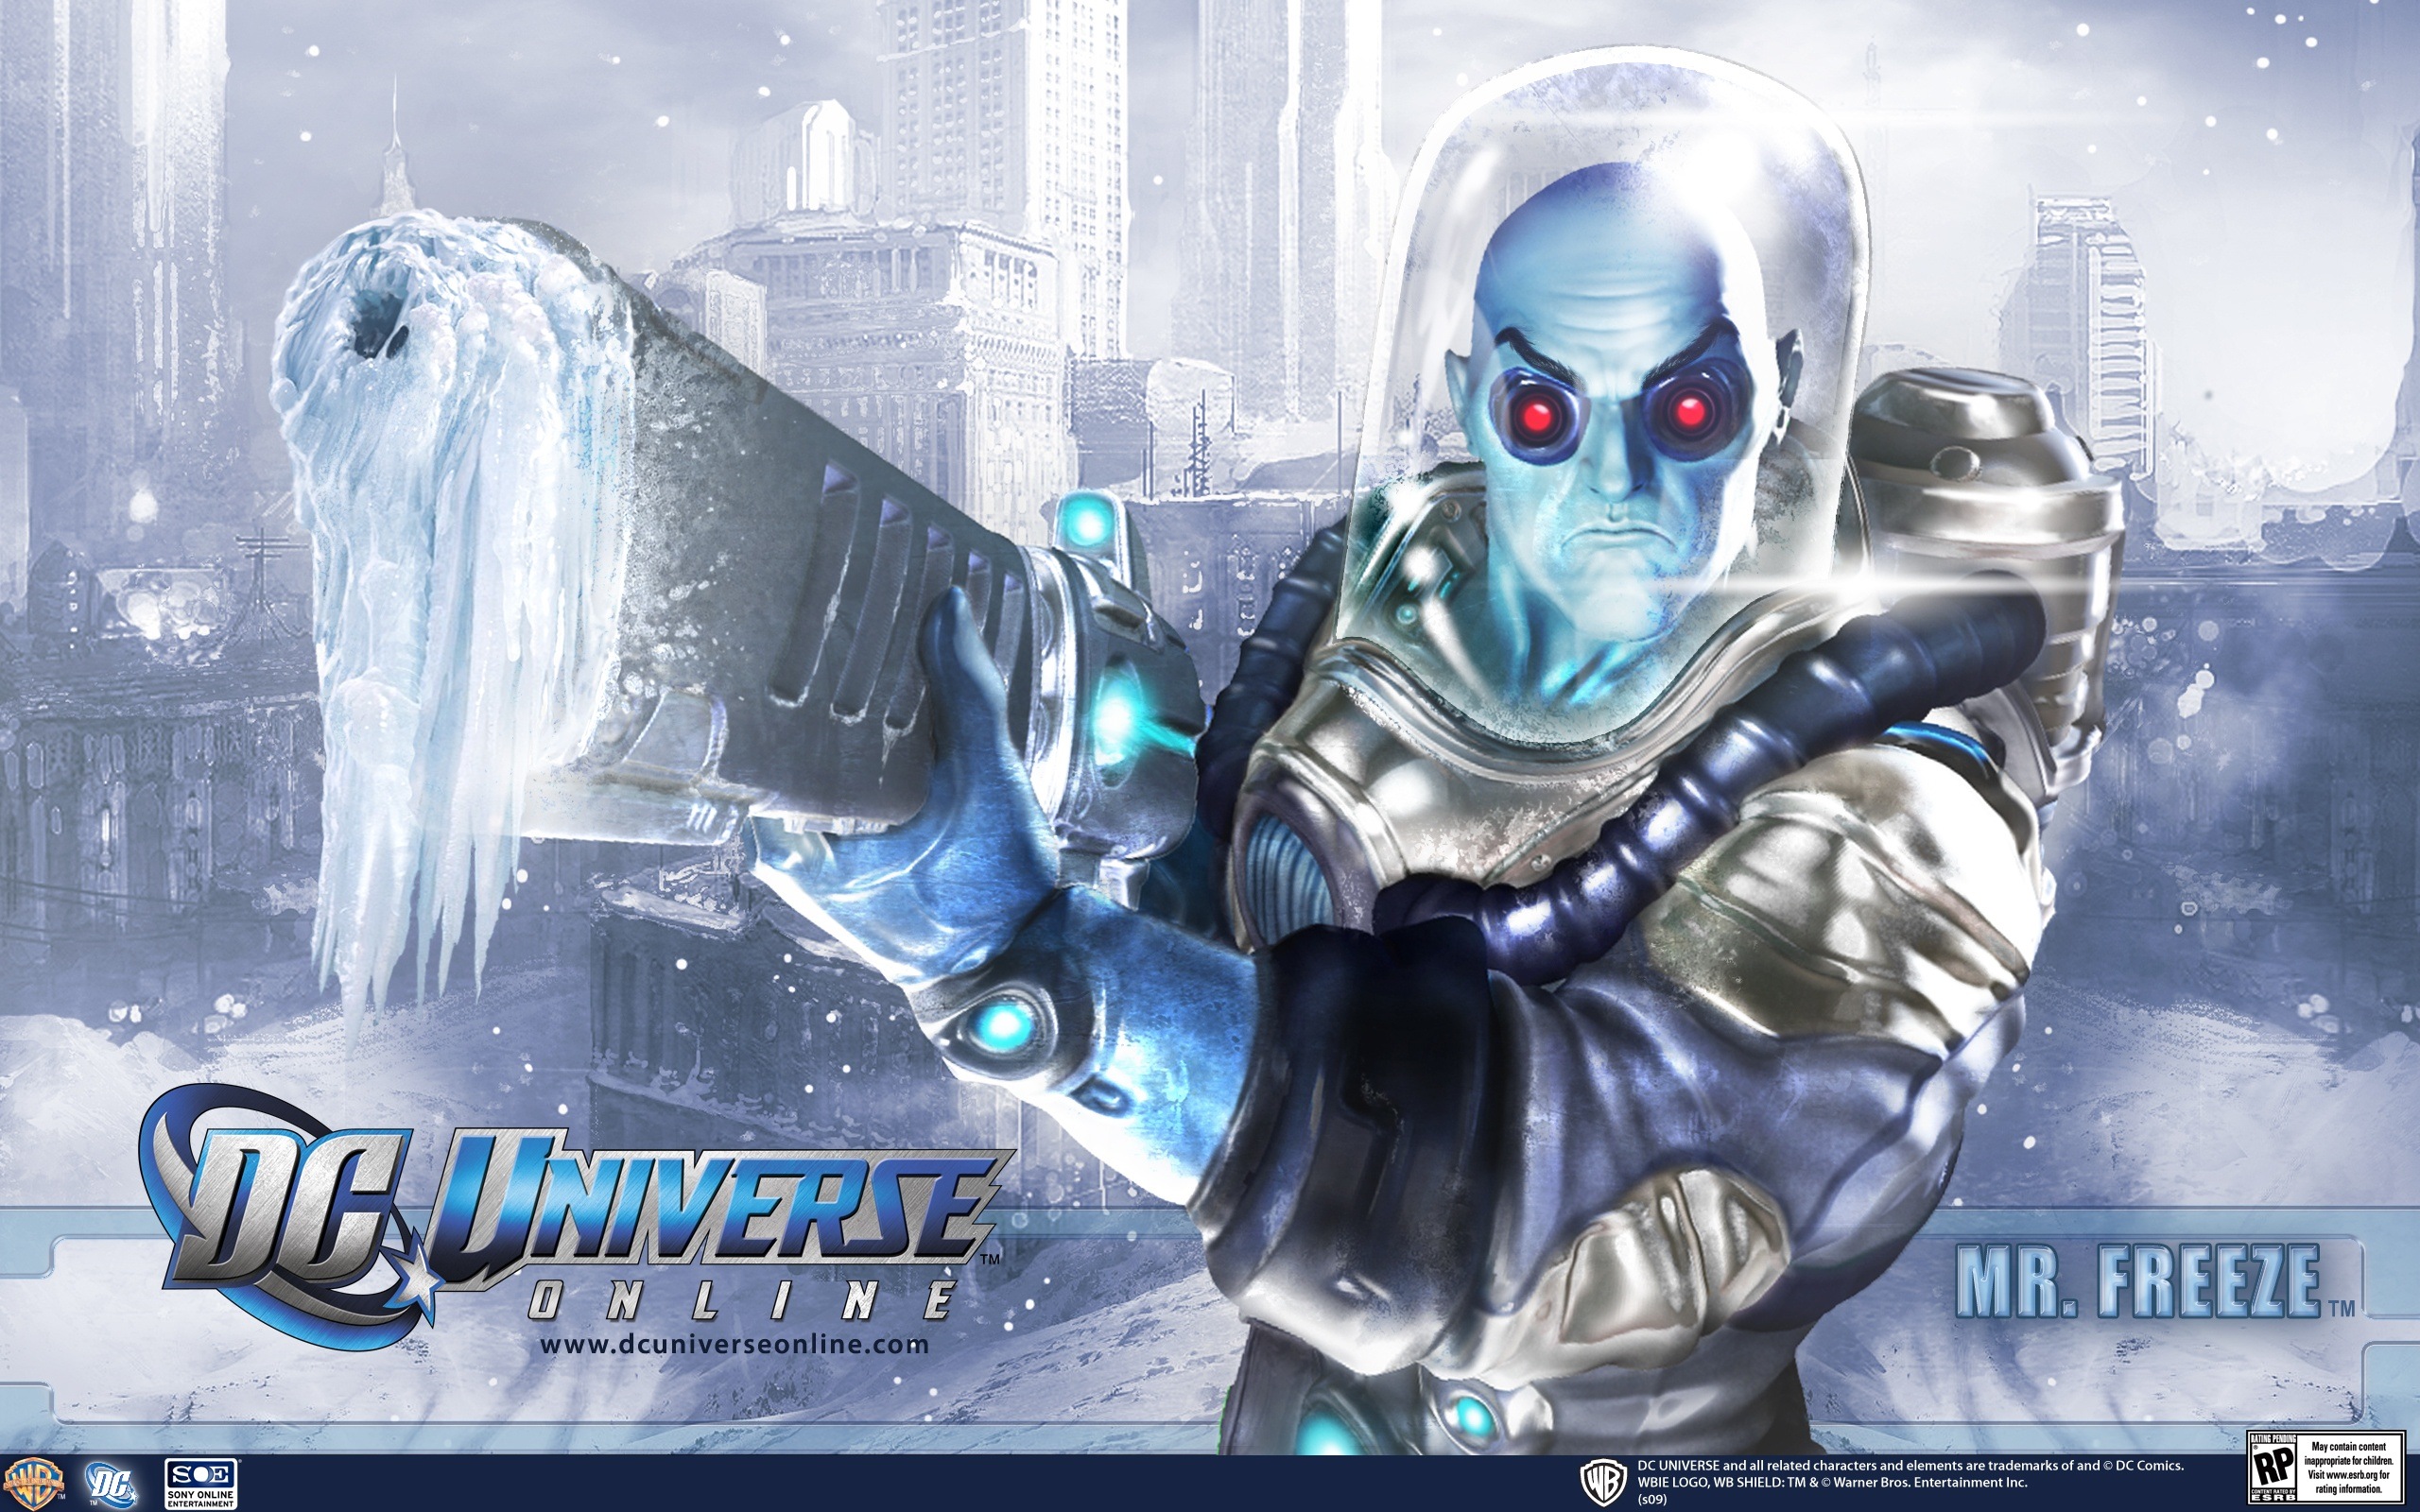 DC Universe Online HD game wallpapers #20 - 2560x1600